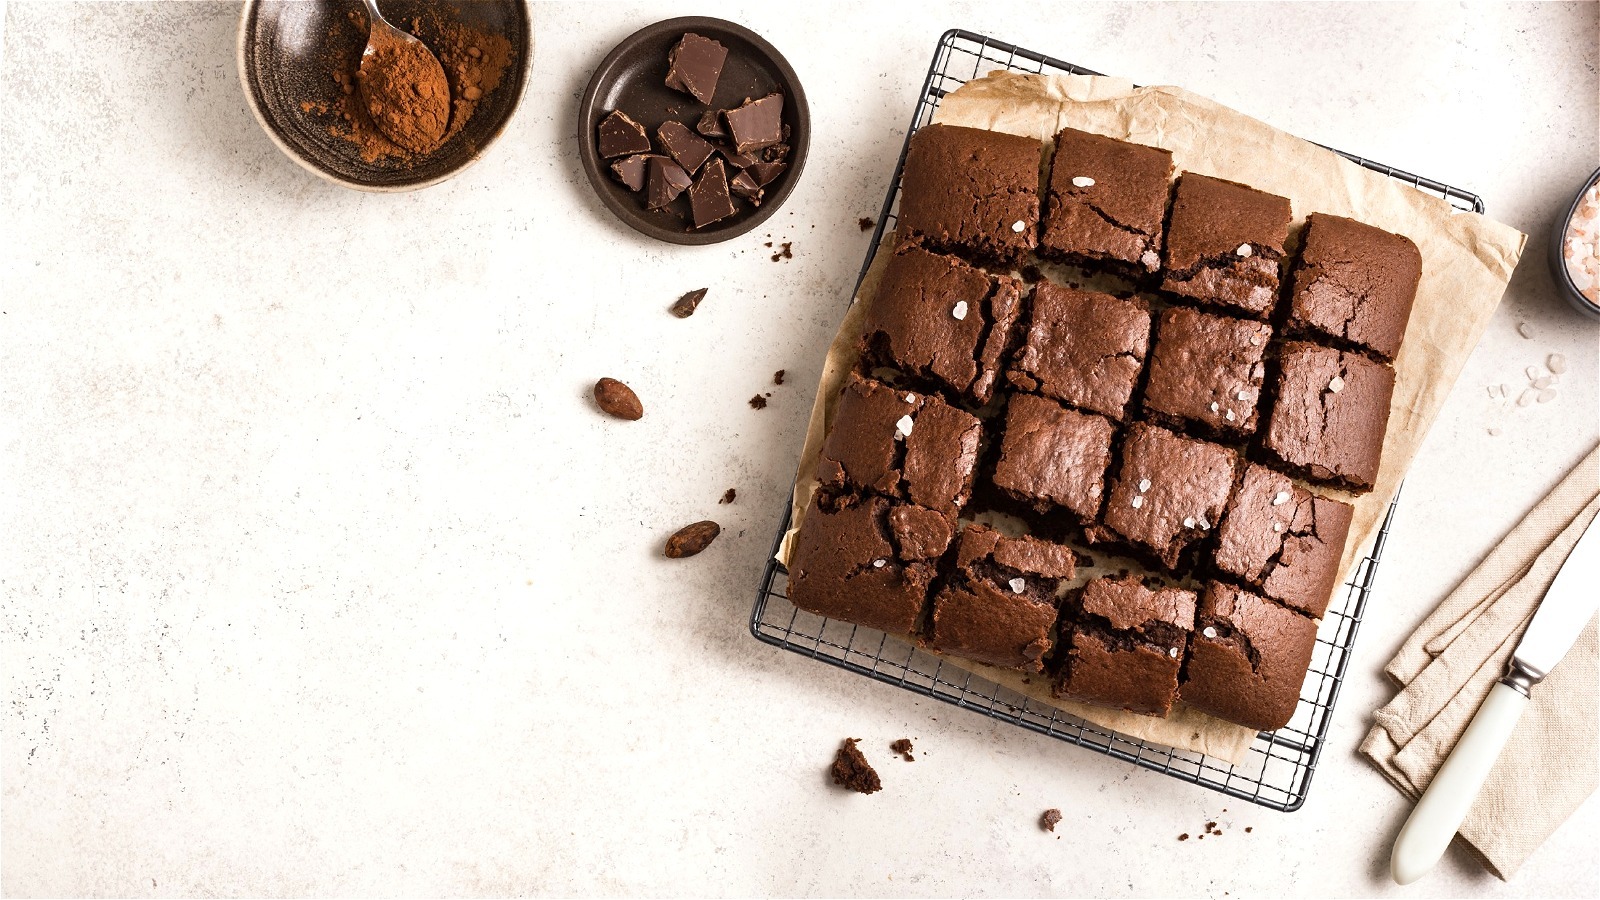 https://www.thedailymeal.com/img/gallery/parchment-paper-is-the-ultimate-brownie-baking-hack/l-intro-1670857940.jpg